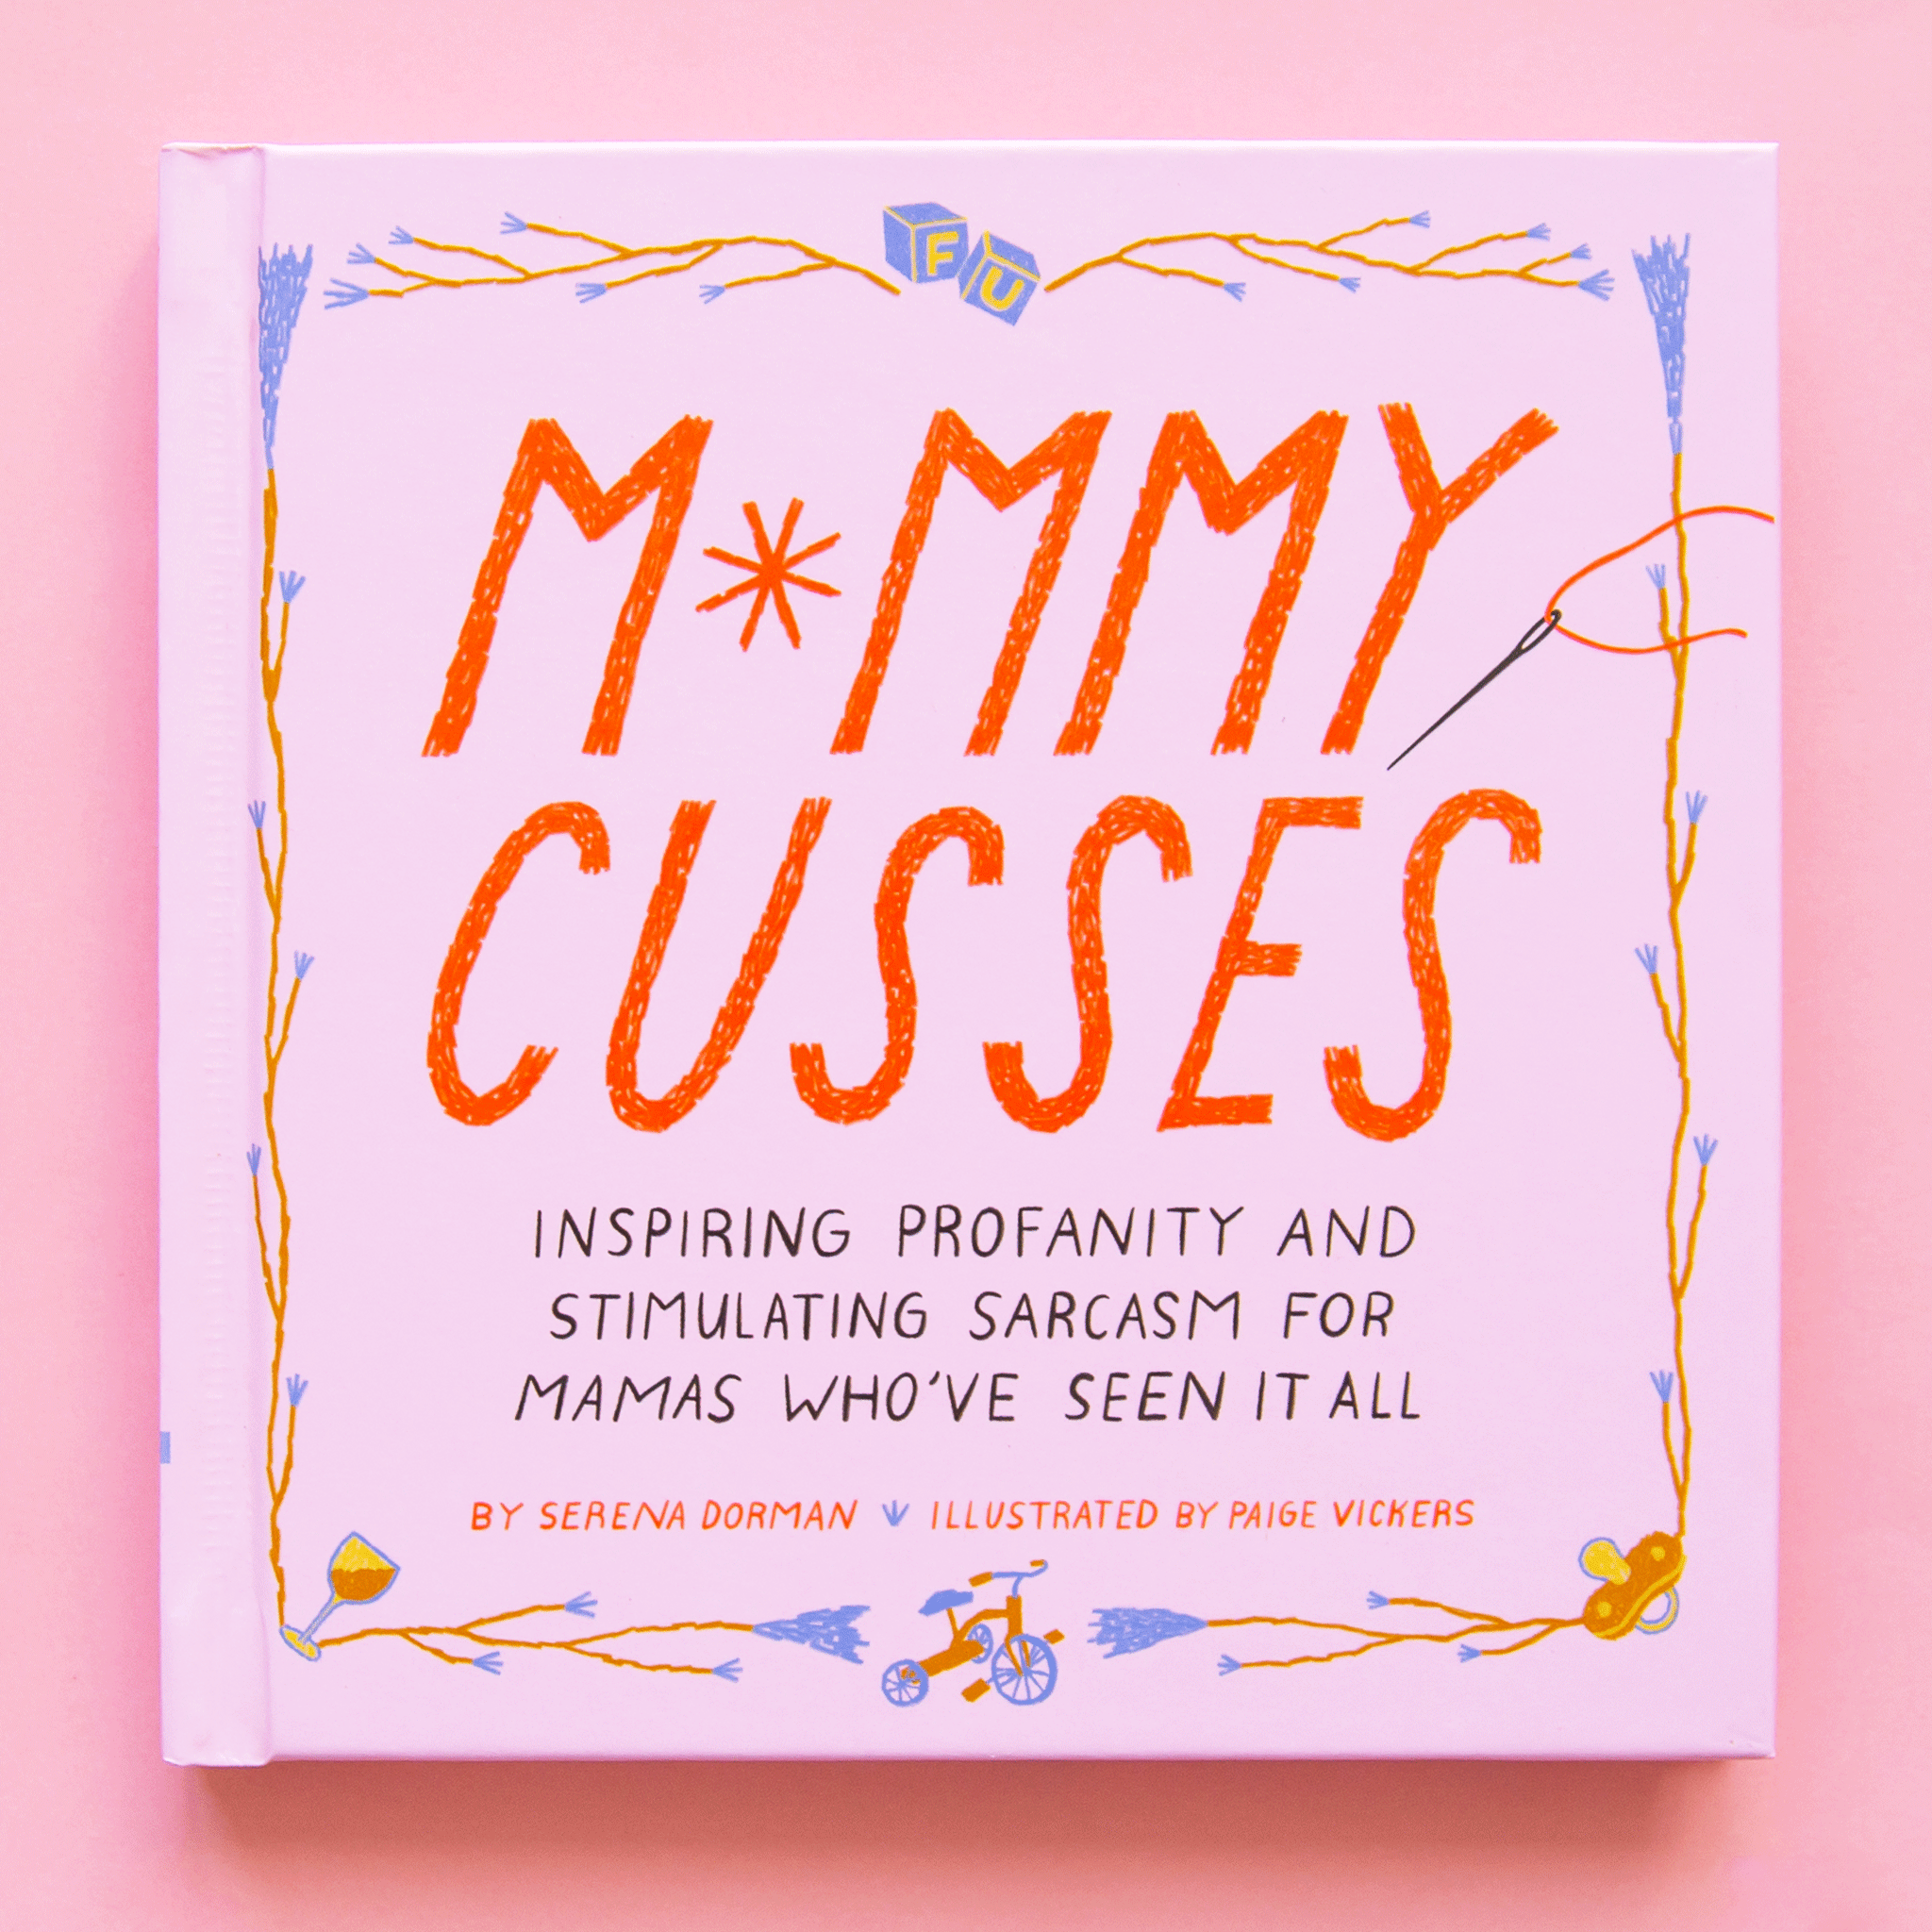 On a pink background is a pink book that reads, "M*mmy Cusses", "Inspiring Profanity And Stimulating Sarcasm For Mamas Who've Seen It All". 